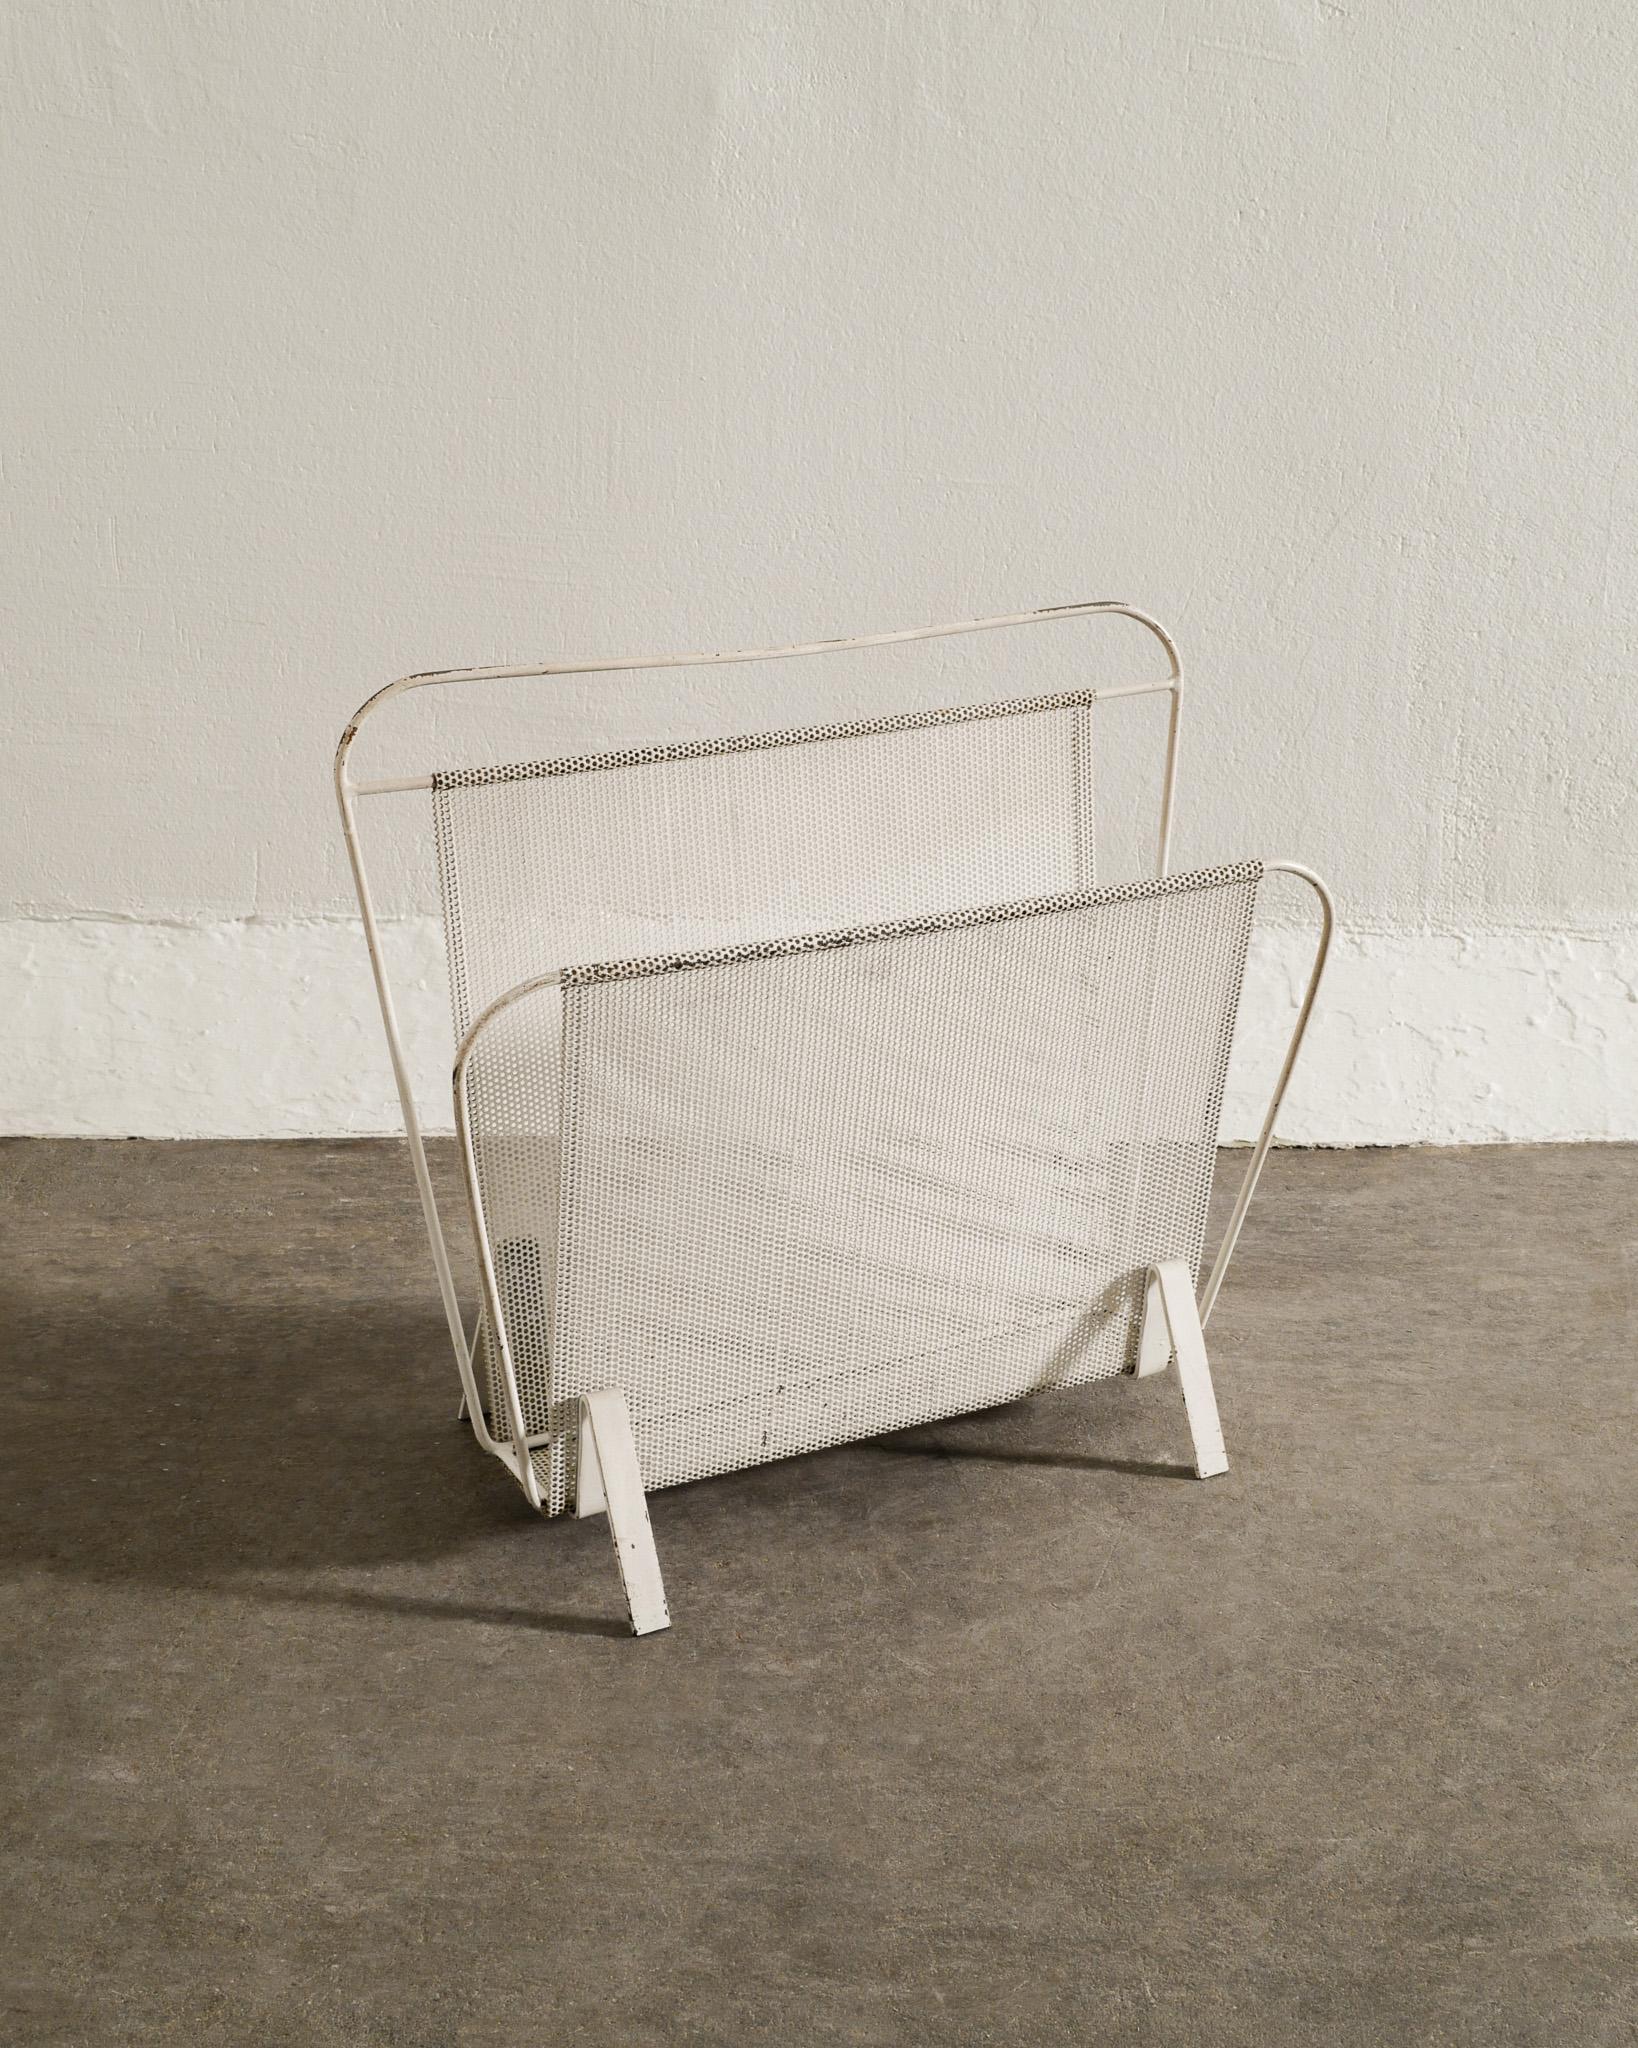 Rare mid century white magazine rack designed by Mathieu Matégot produced in France during the 1950s. In good original condition. 

Dimensions: H: 14.57 in (37 cm) W: 15.75 in (40 cm) D: 5.52 in (14 cm)